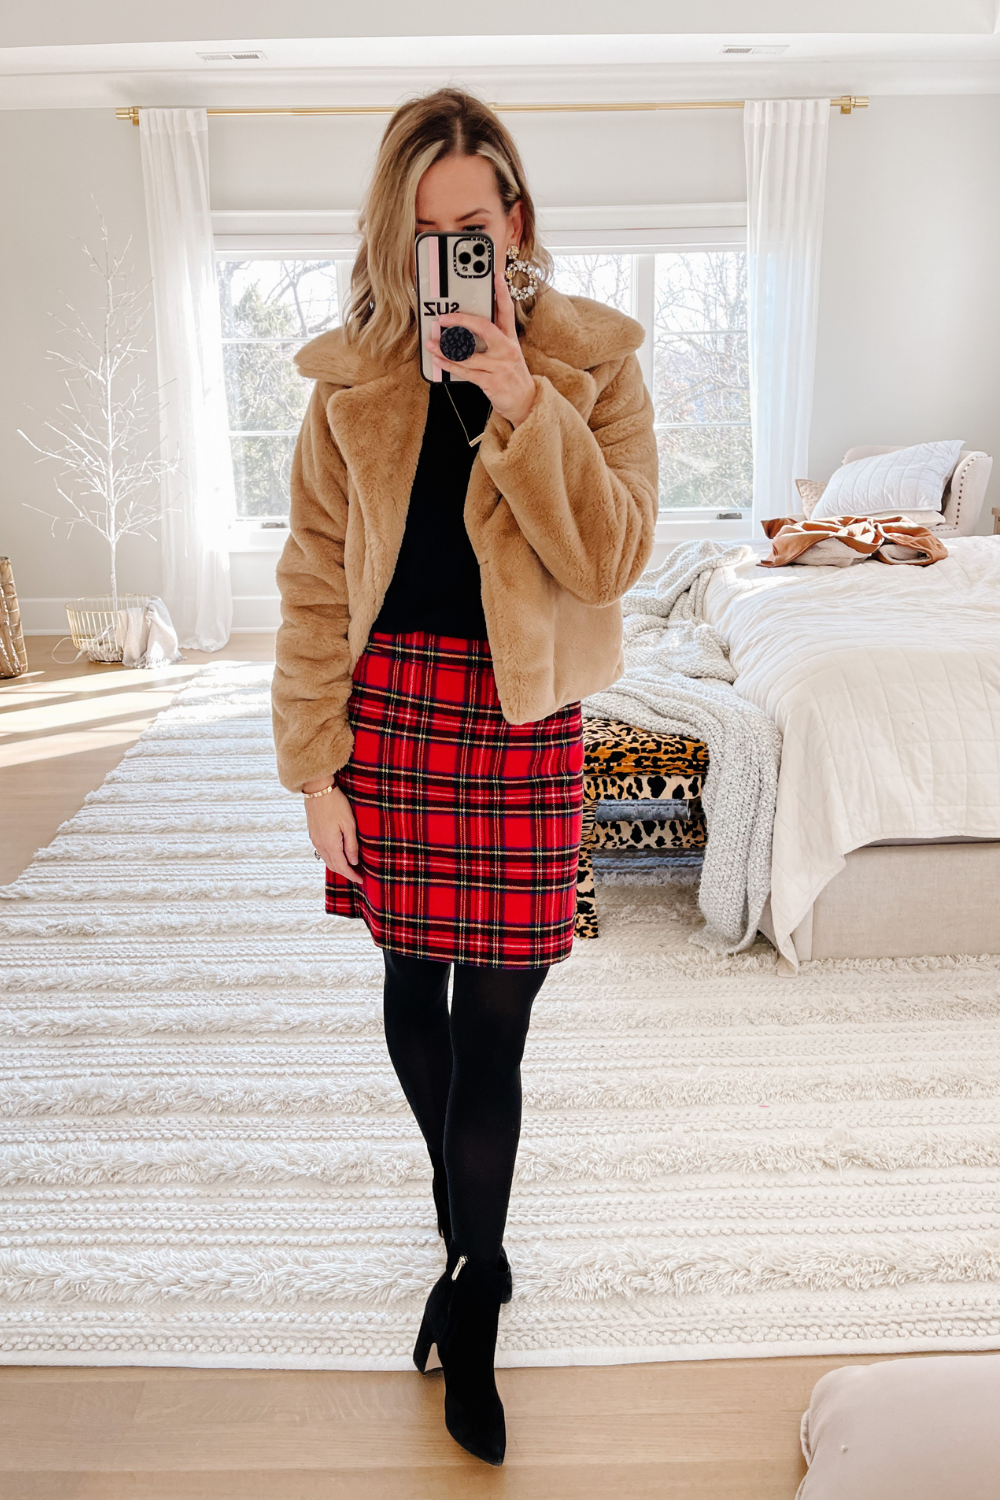 Suzanne wearing a red plaid pencil skirt, black top, faux fur jacket, tights and booties